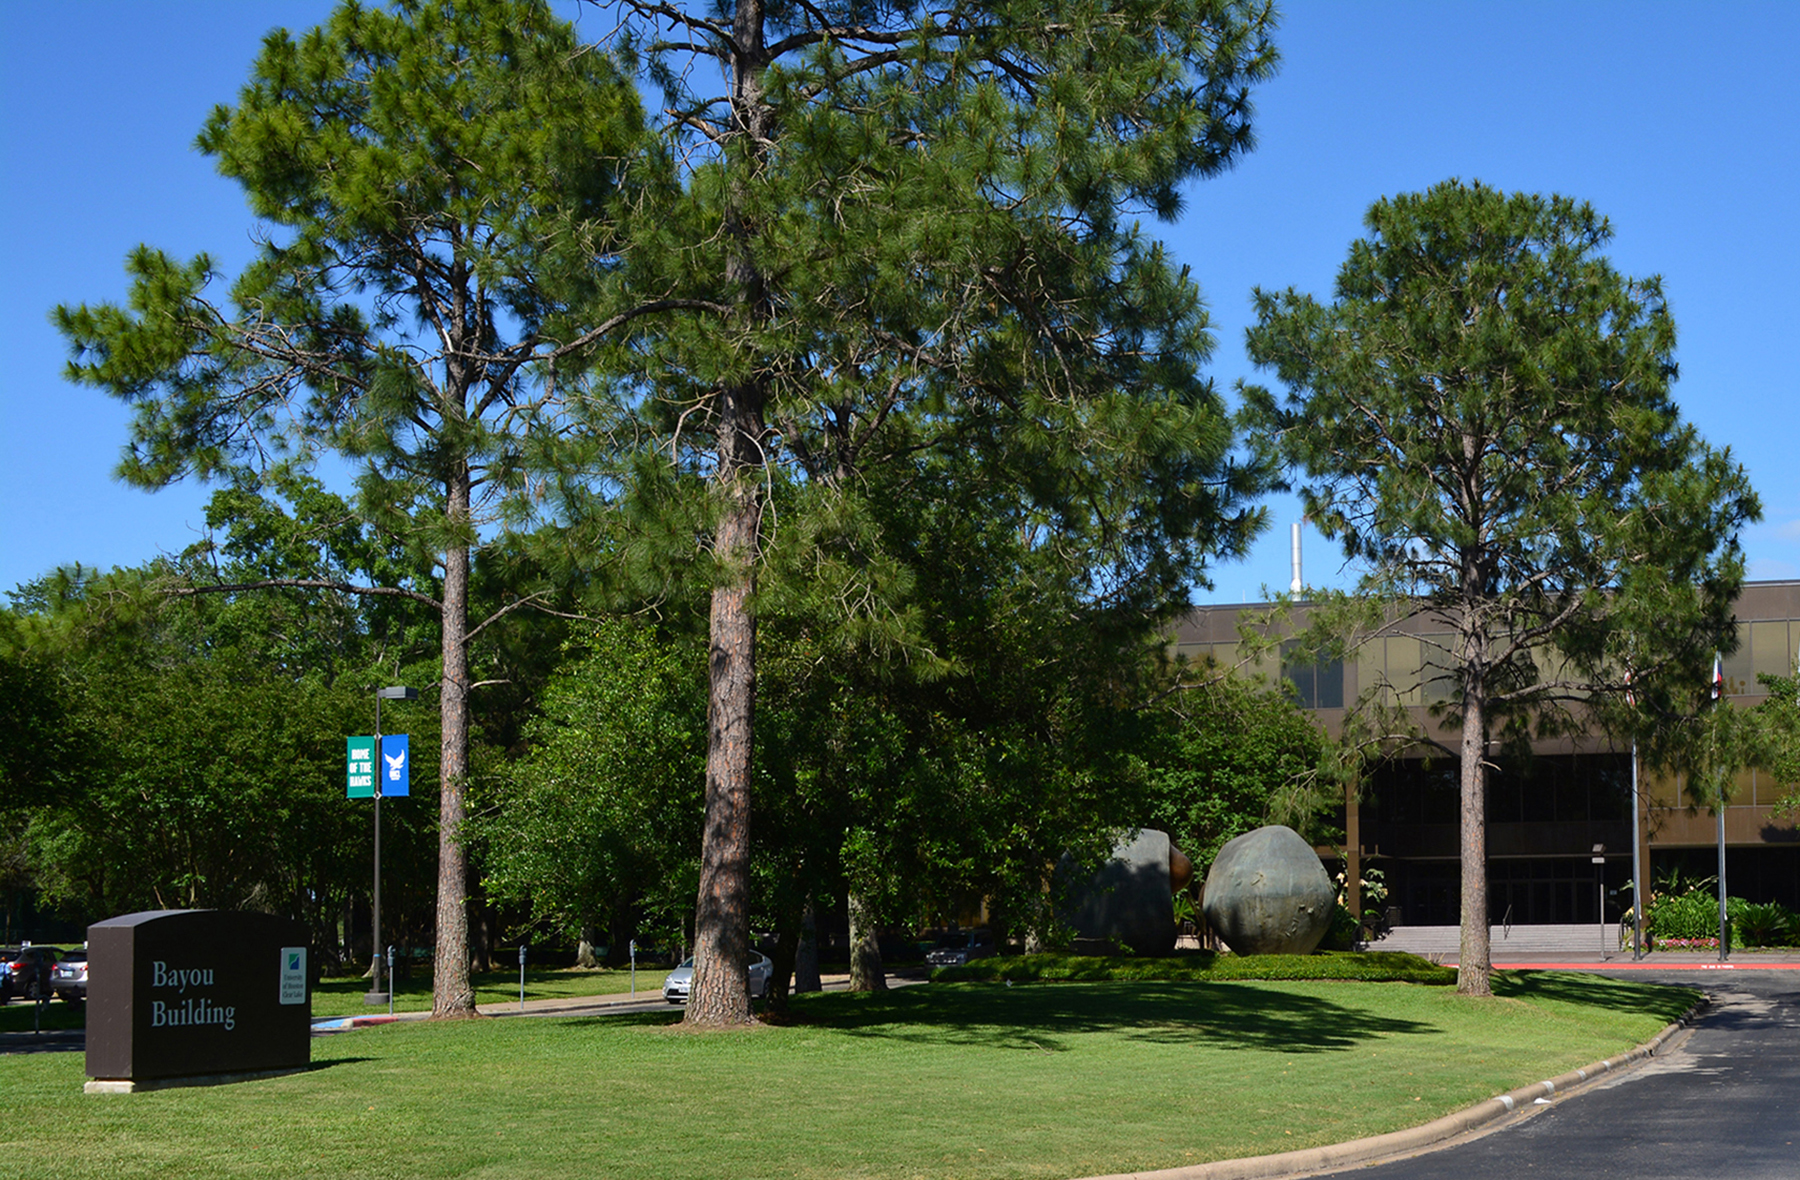 UHCL's Bayou Building. Photo courtesy of UHCL Office of Communications.